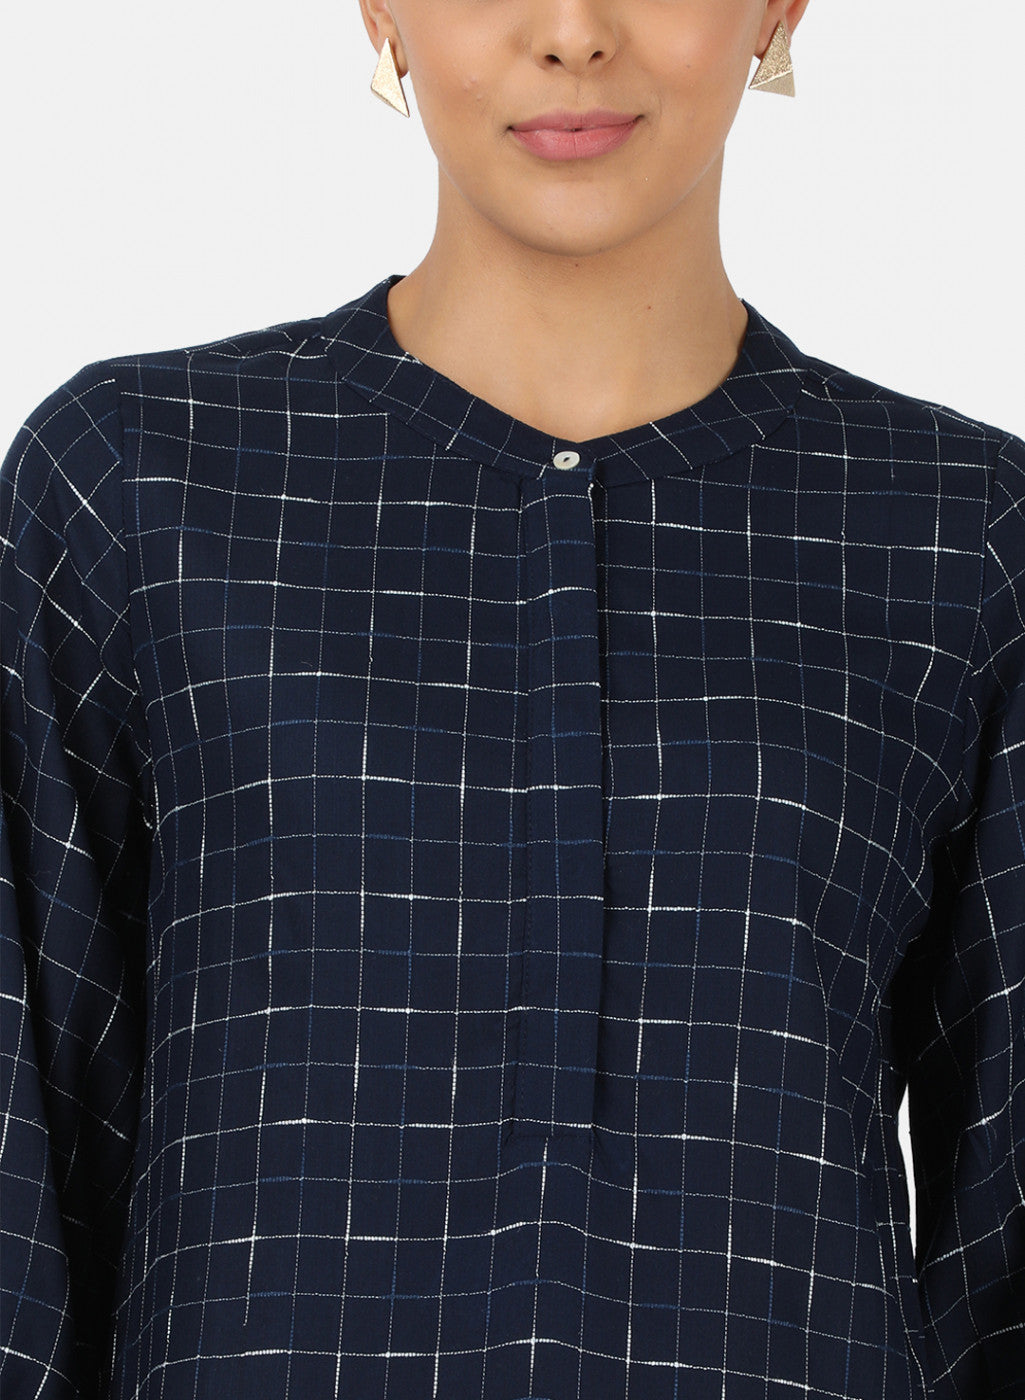 Womens Navy Blue Check Top